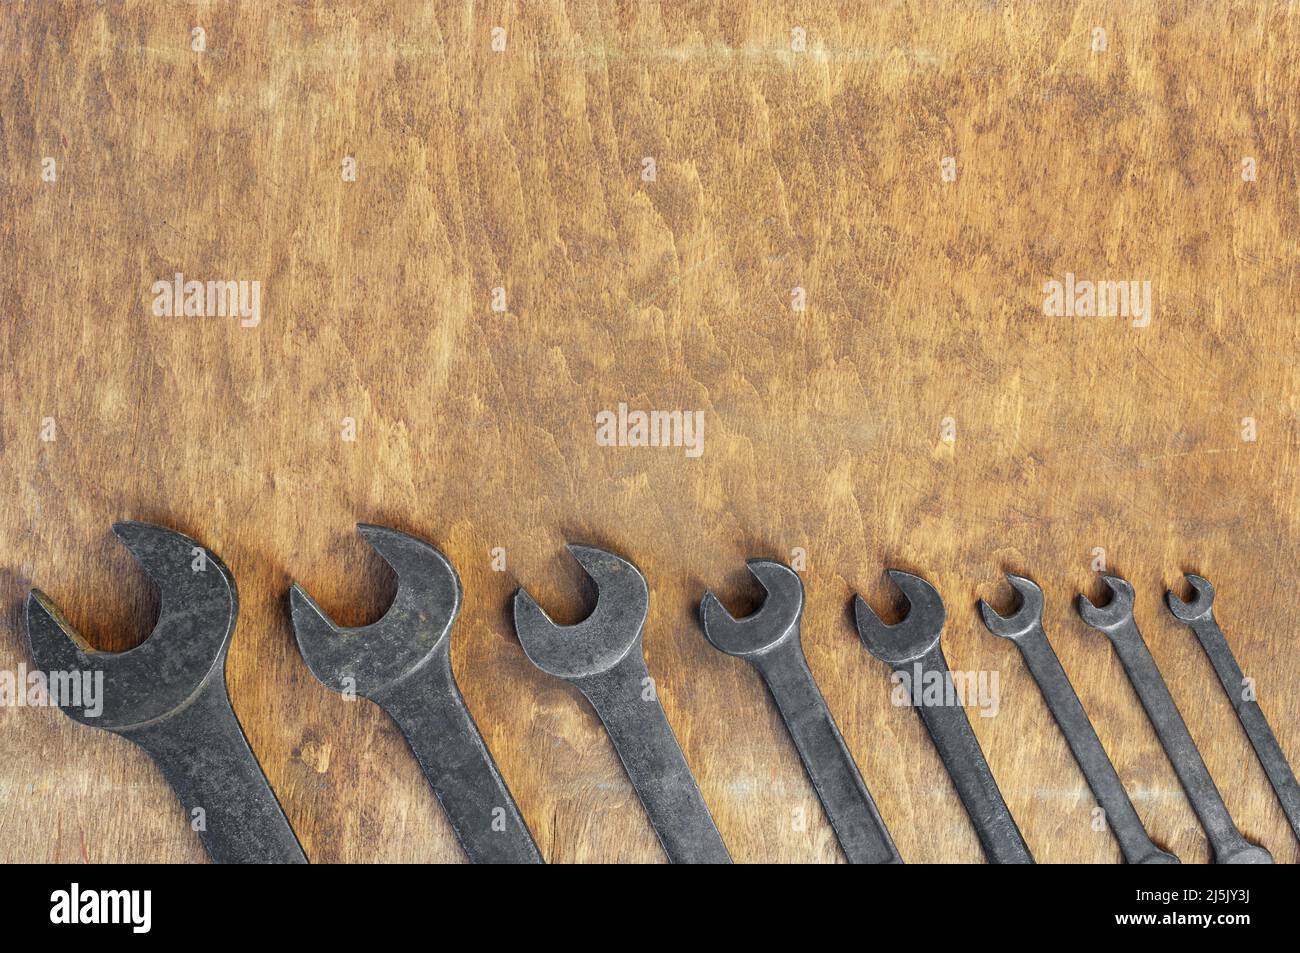 Set of old wrenches on wooden background Stock Photo